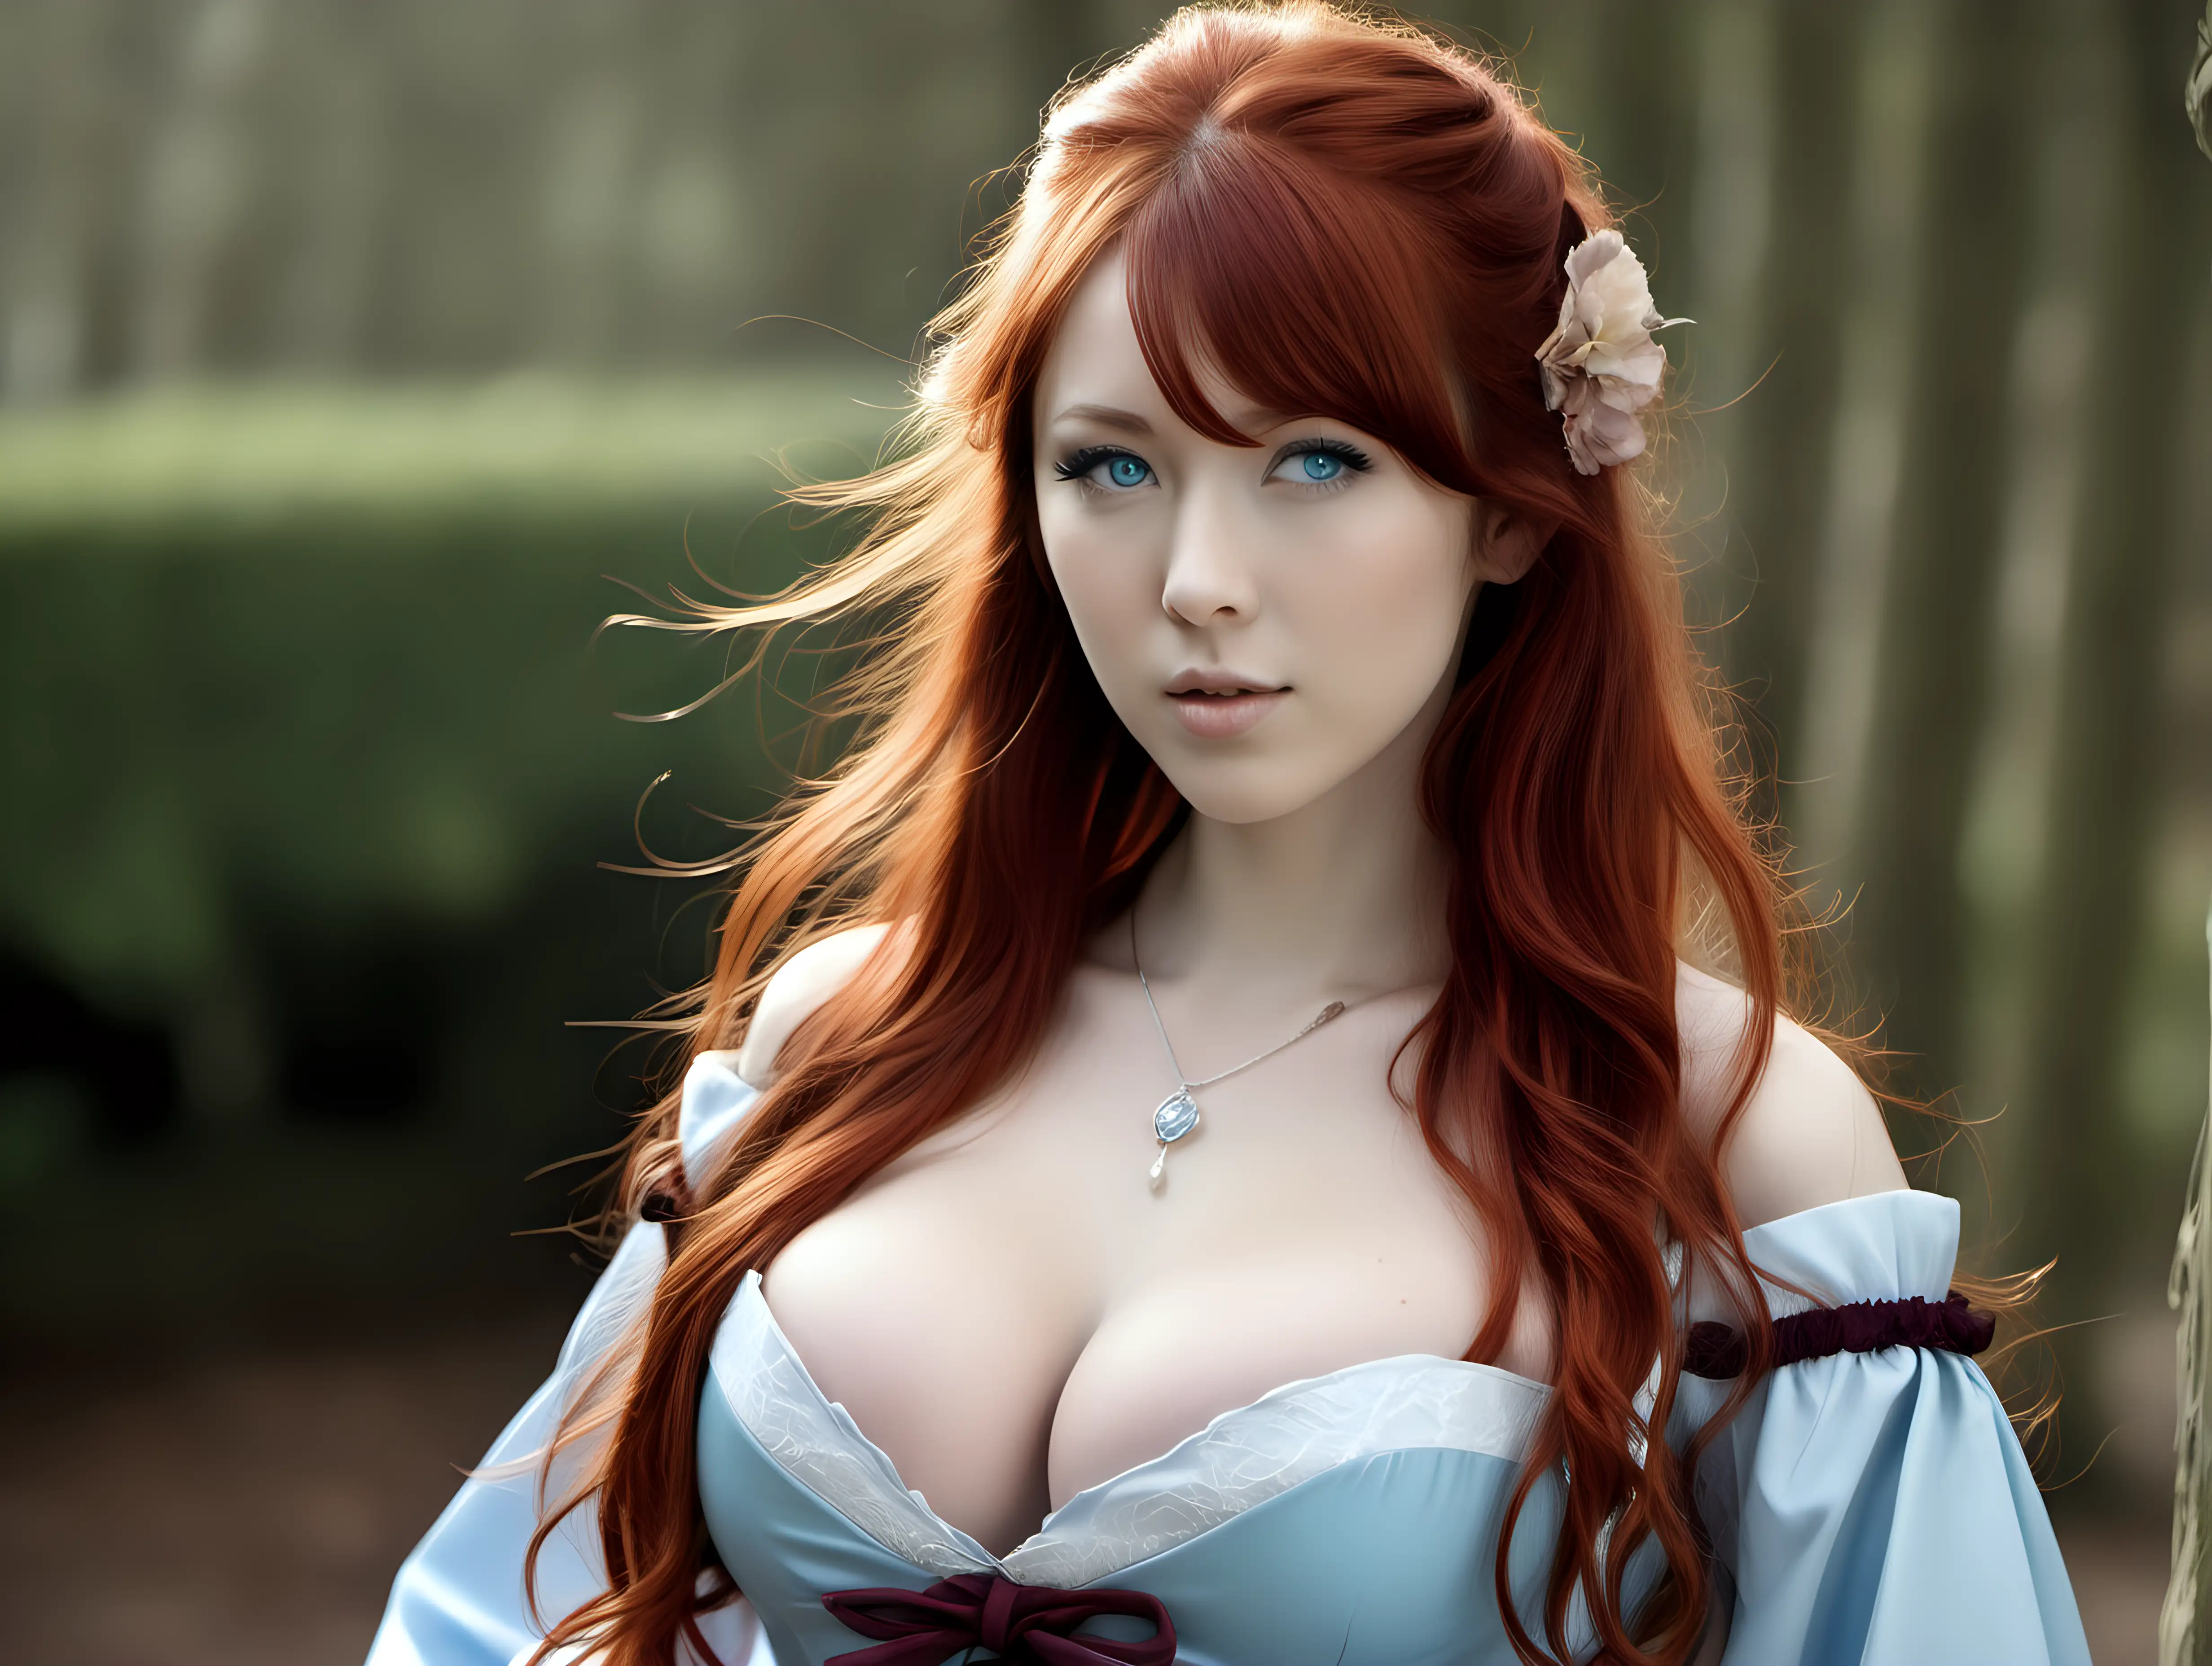 Nice C Cup Boobs On Redhair Beauty from